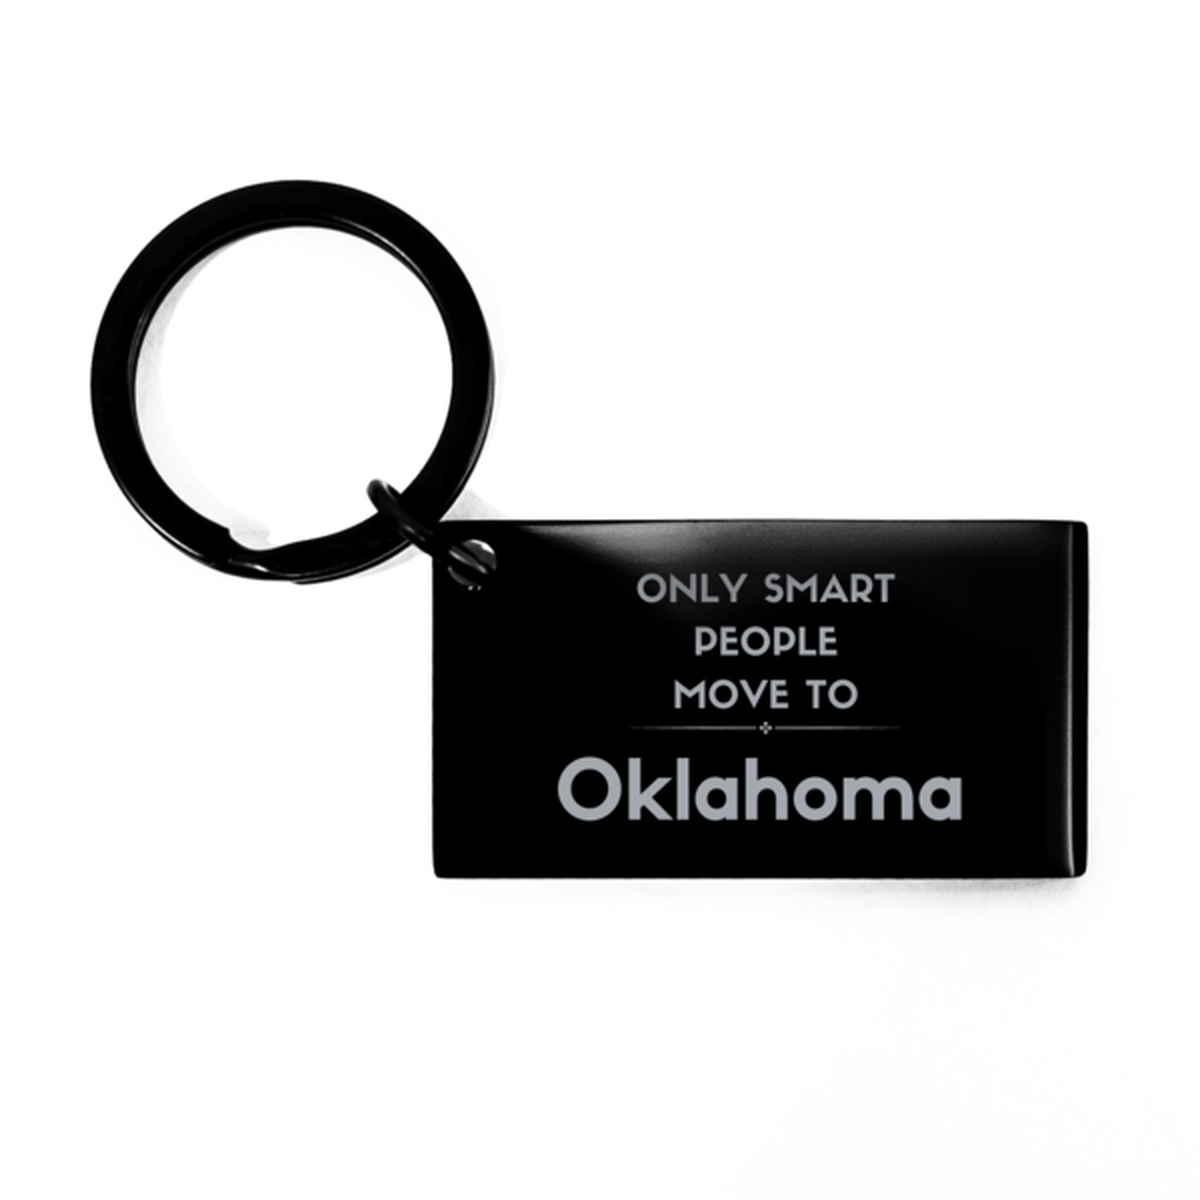 Only smart people move to Oklahoma Keychain, Gag Gifts For Oklahoma, Move to Oklahoma Gifts for Friends Coworker Funny Saying Quote